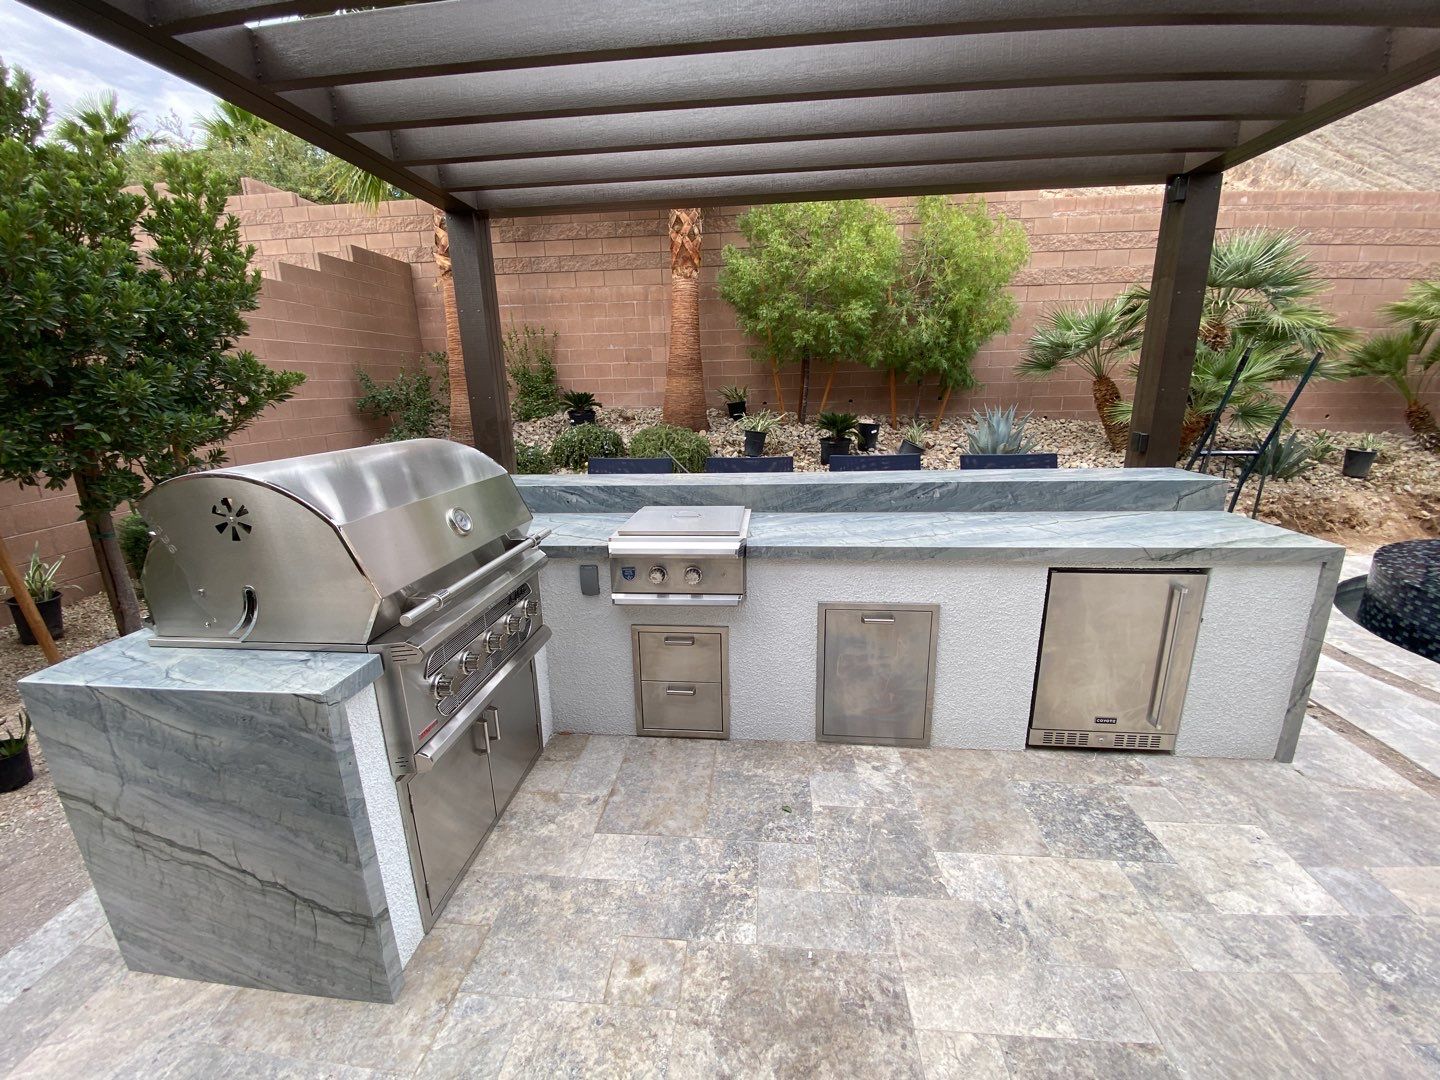 A bbq grill and sink in an outdoor kitchen.